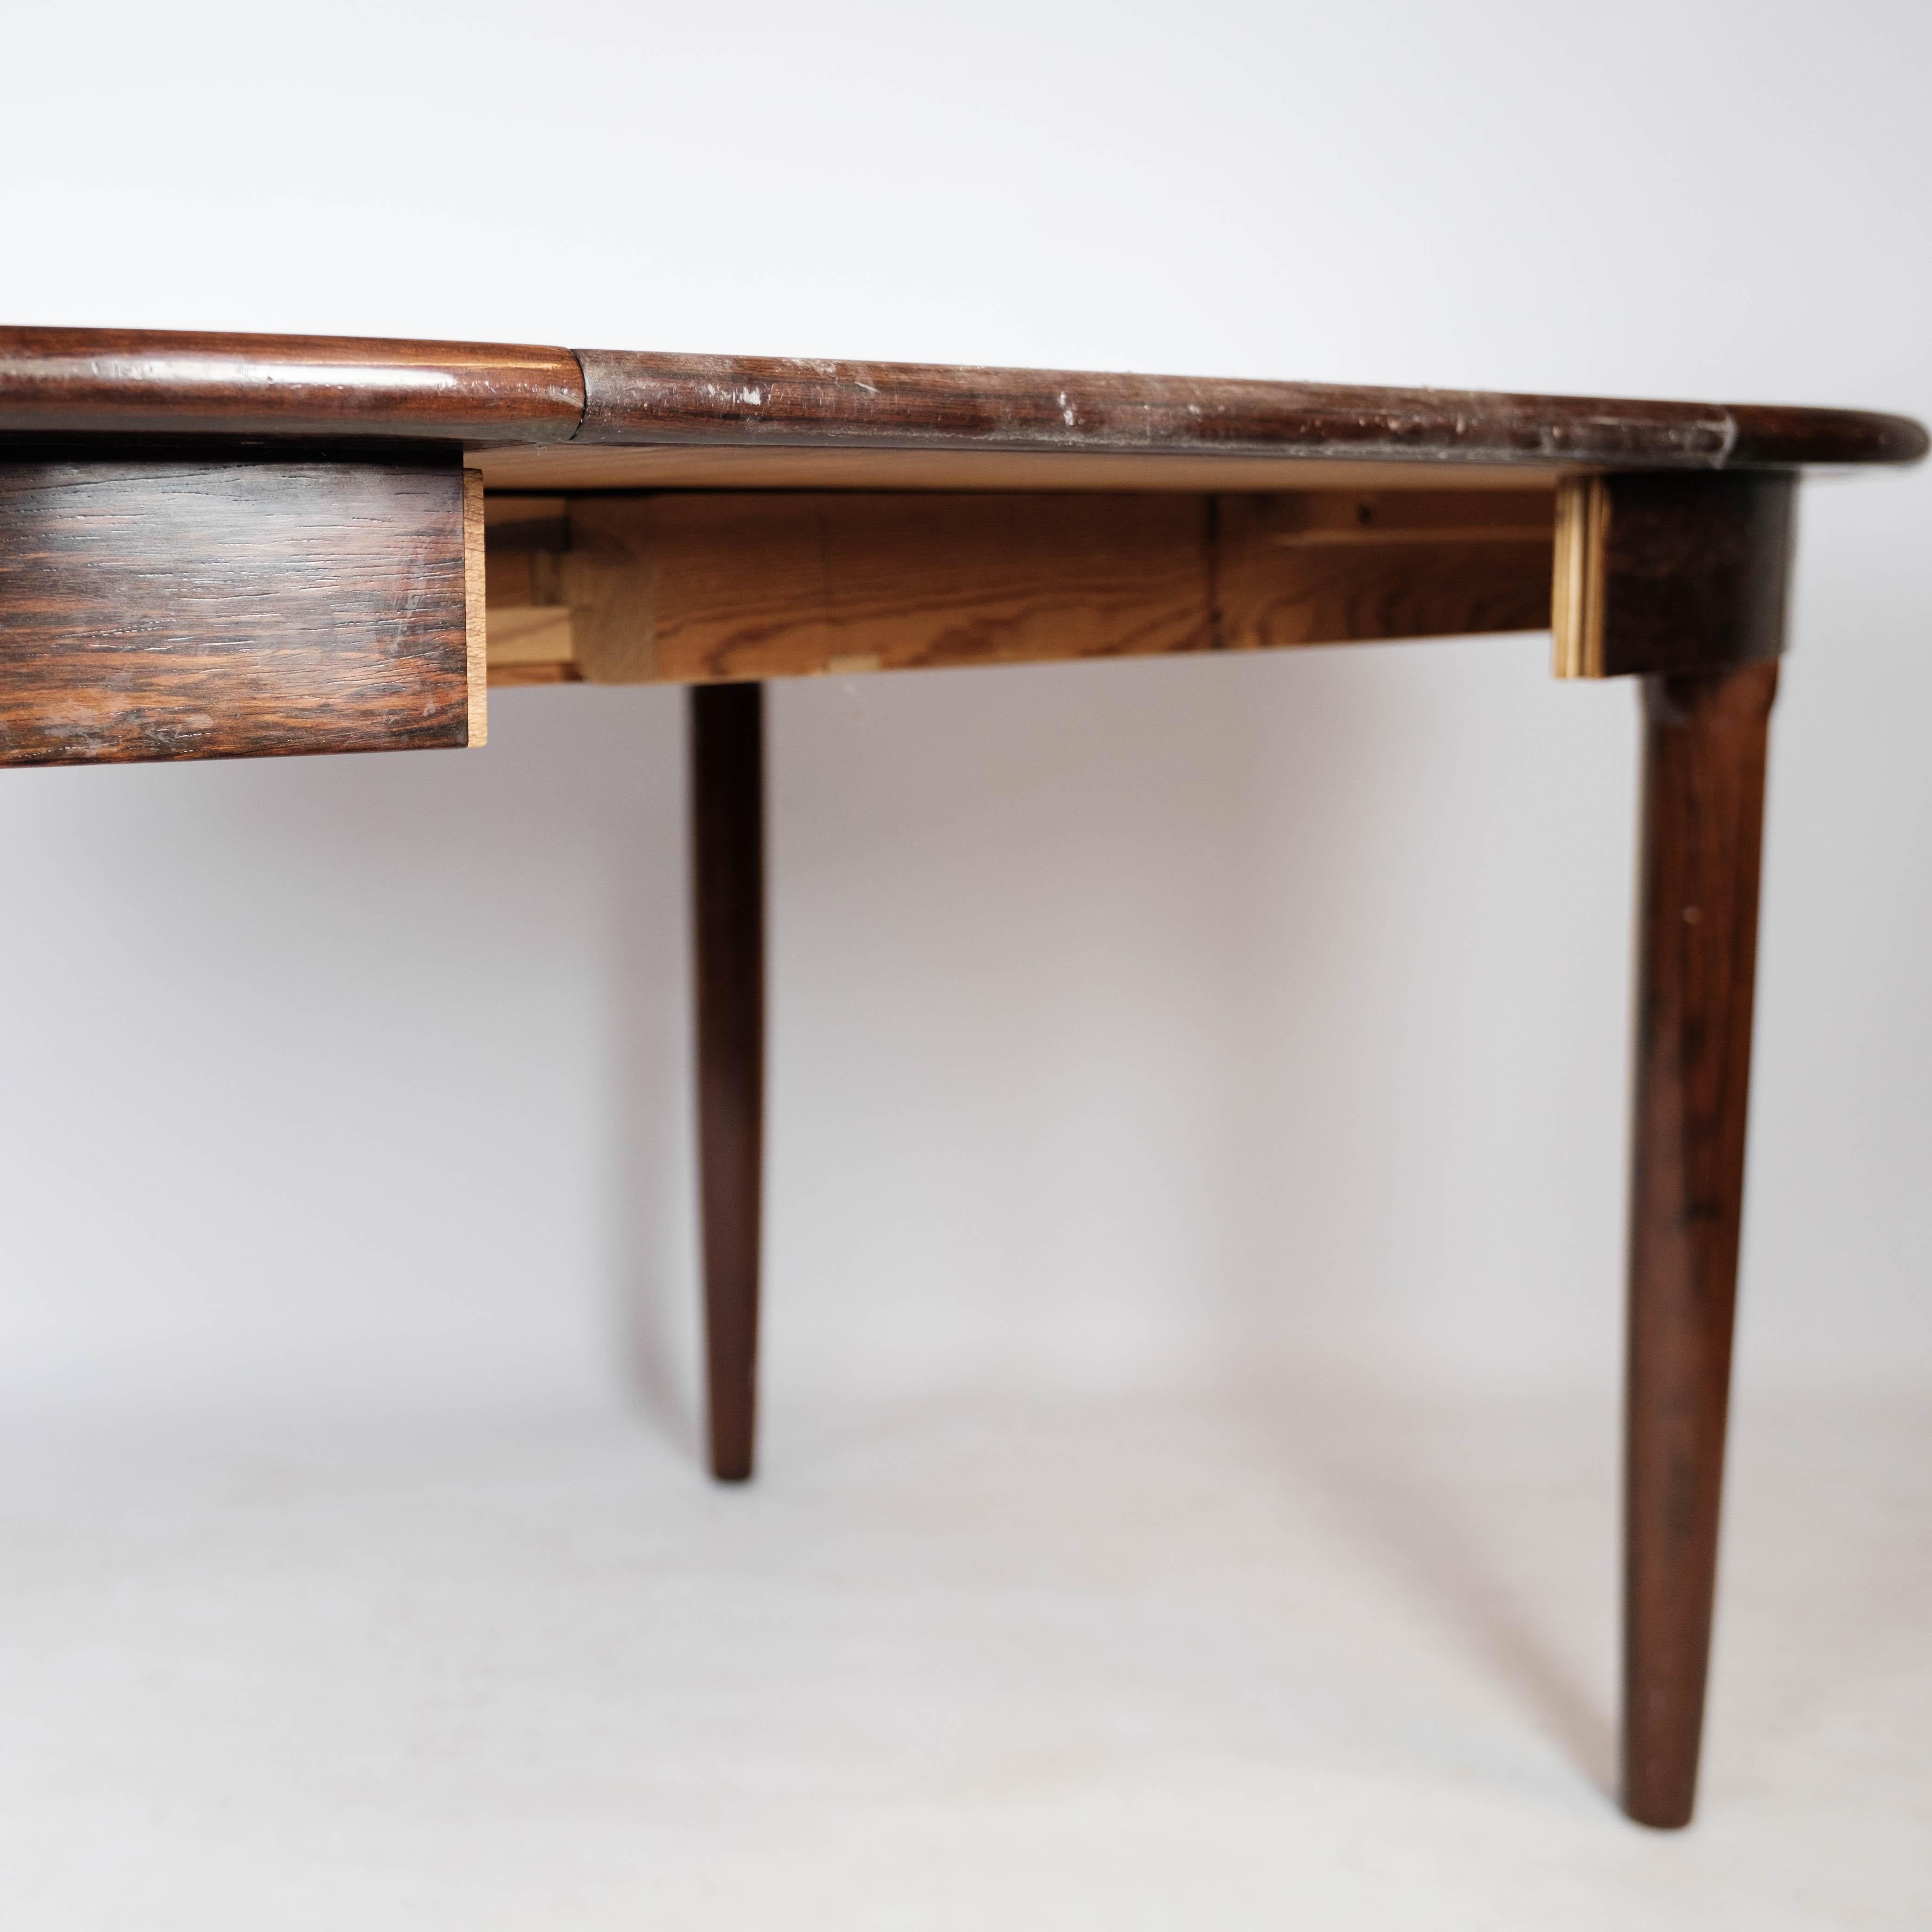 Dining Table Made In Rosewood With Extension, Danish Design From 1960s For Sale 8